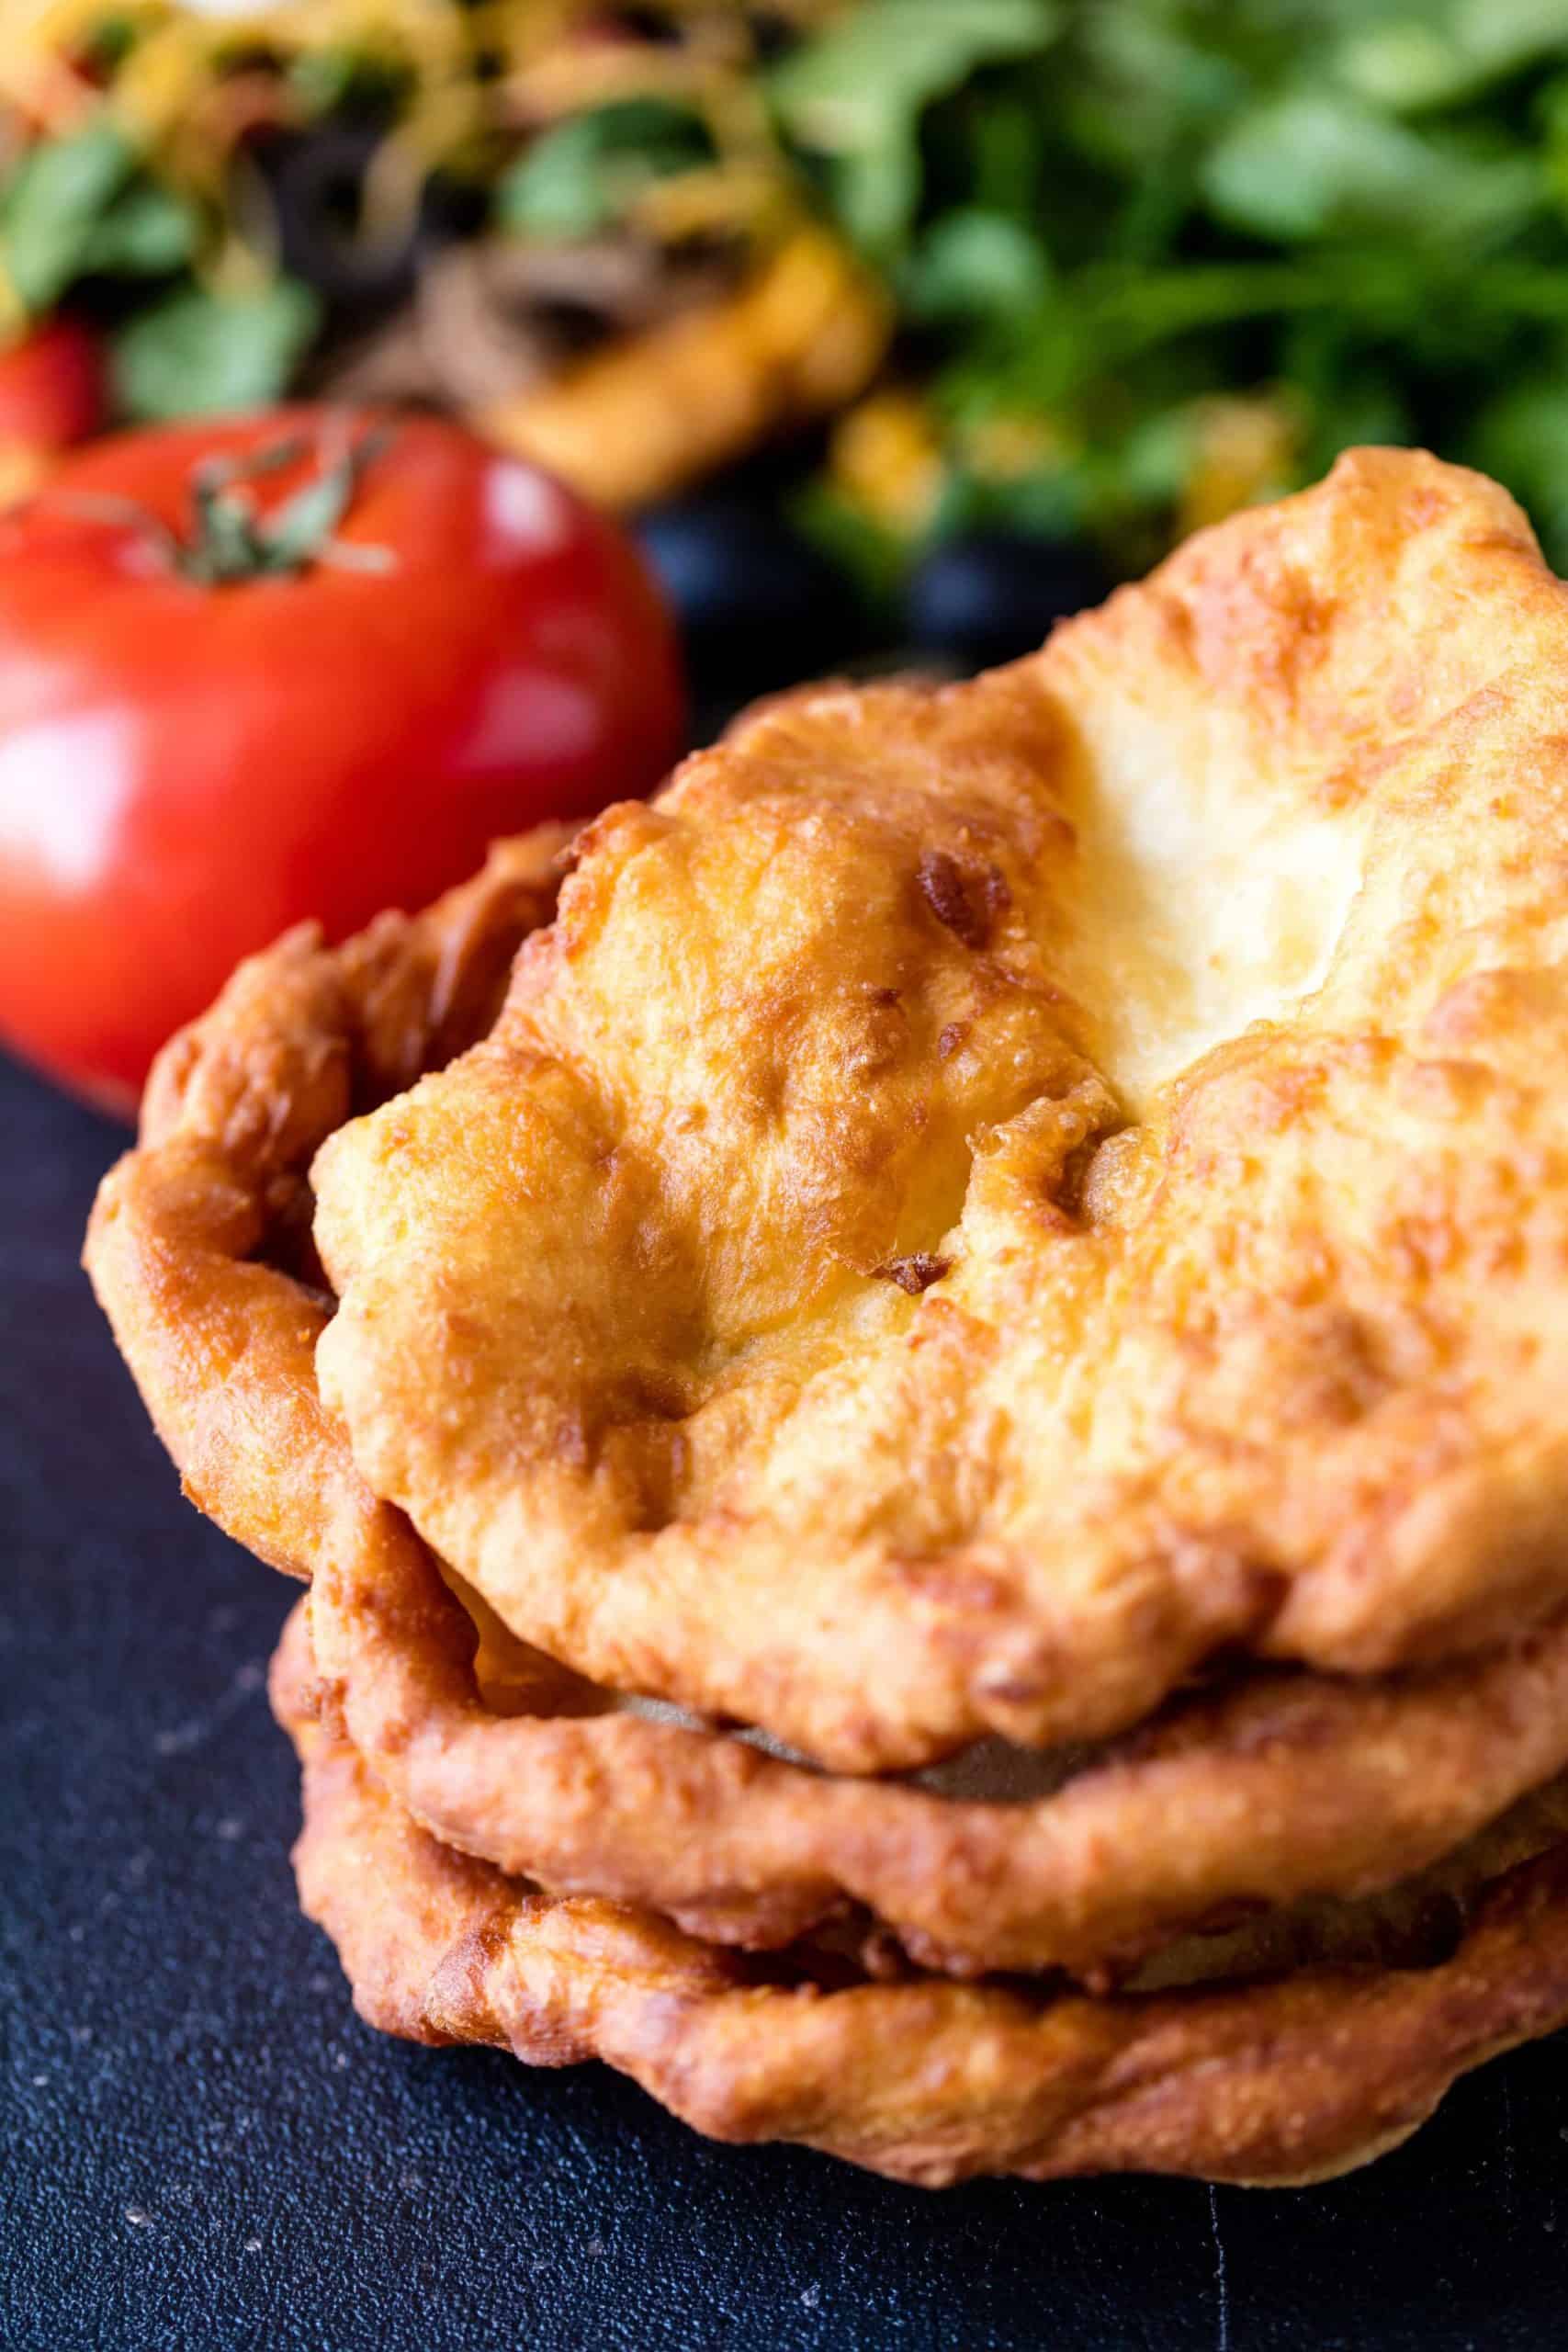 Basic, authentic fry bread